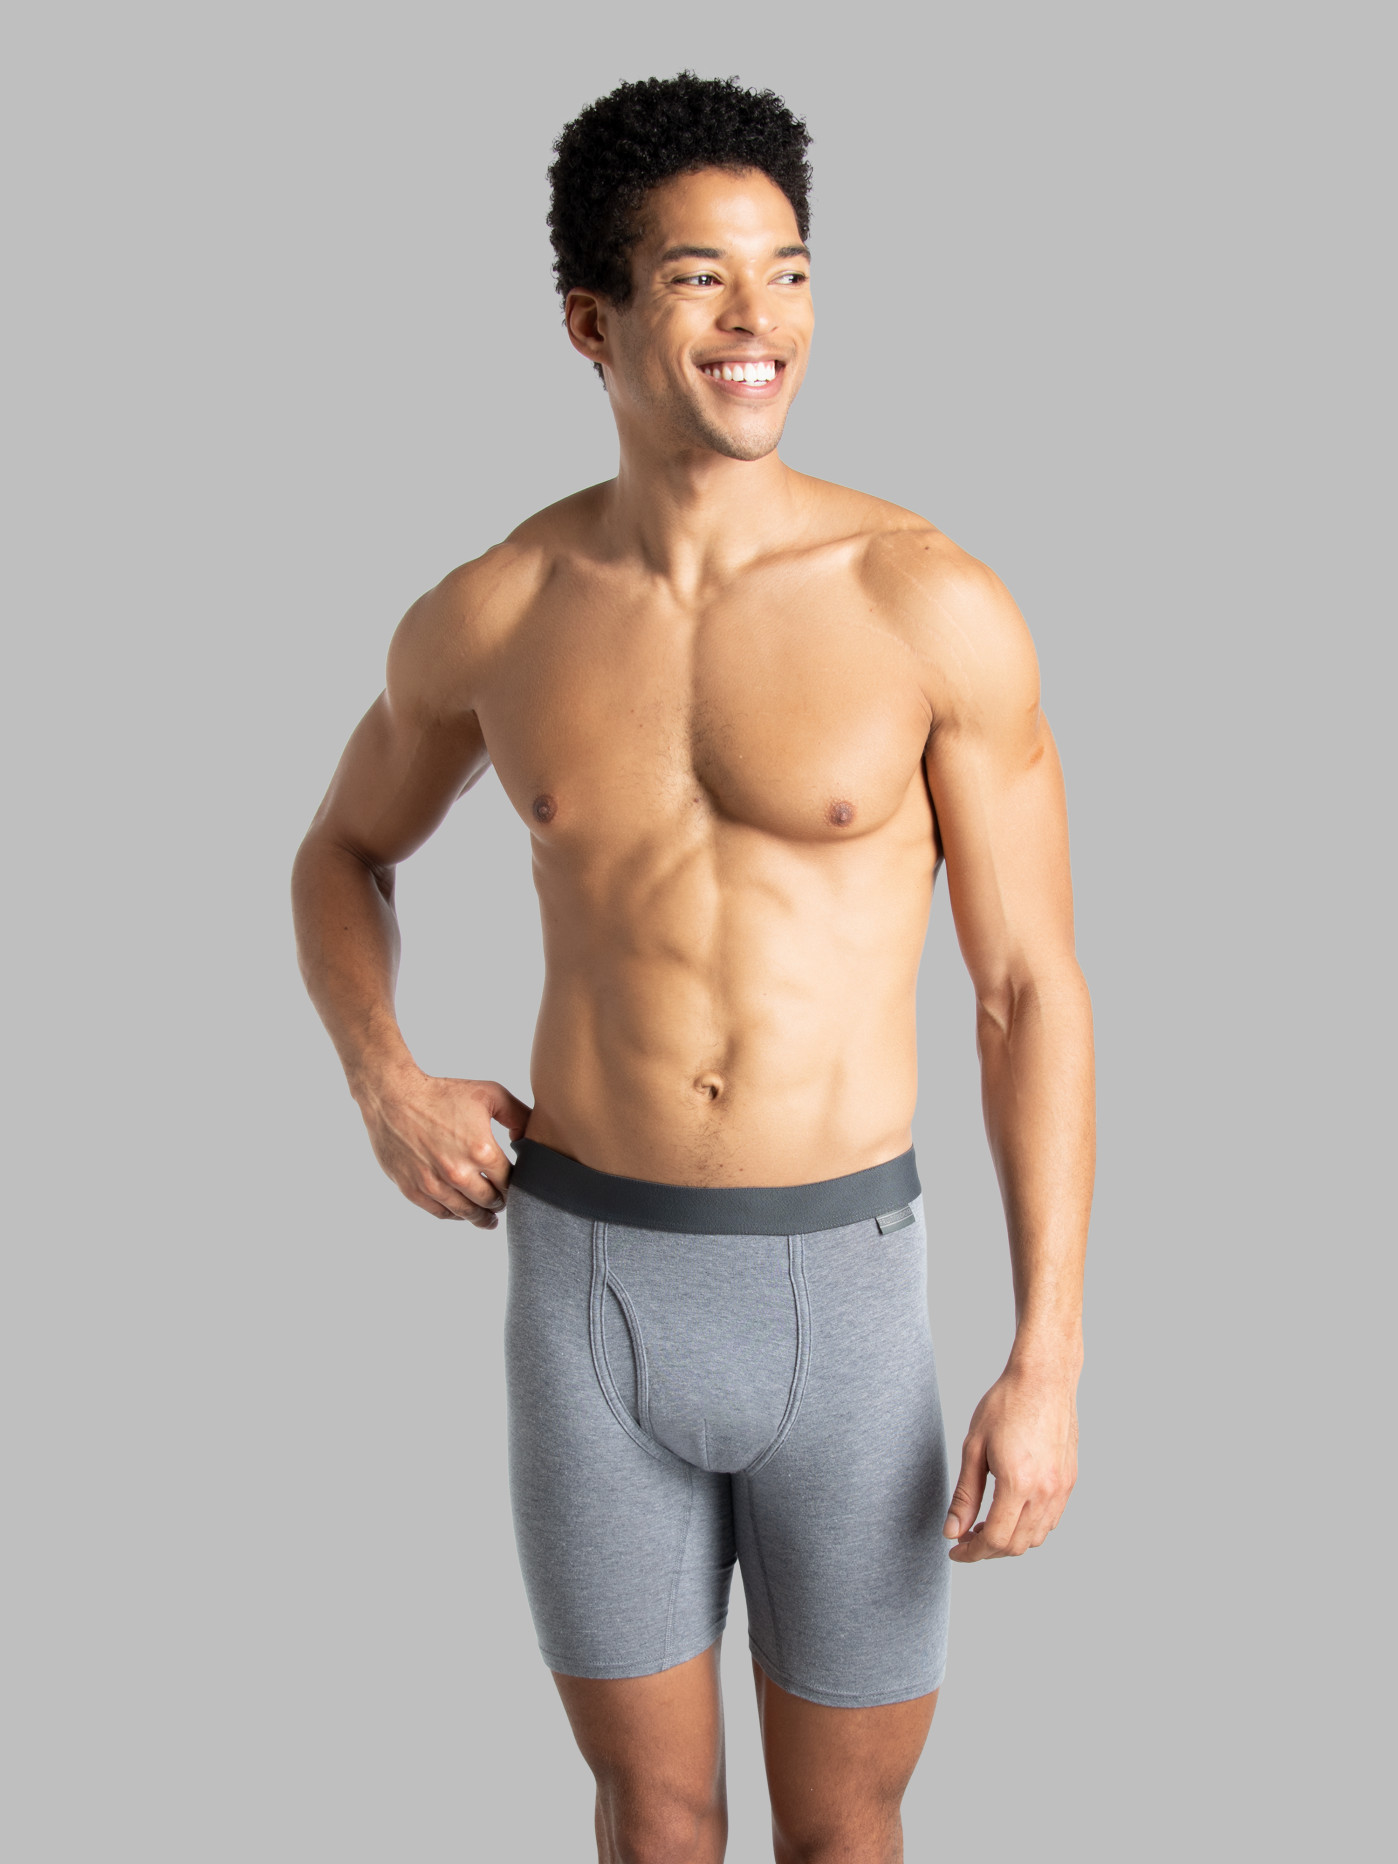 Hanes Comfort Flex Fit Ultra Soft Cotton Modal Blend Boxer Brief 4-Pack  Assorted XL at  Men's Clothing store